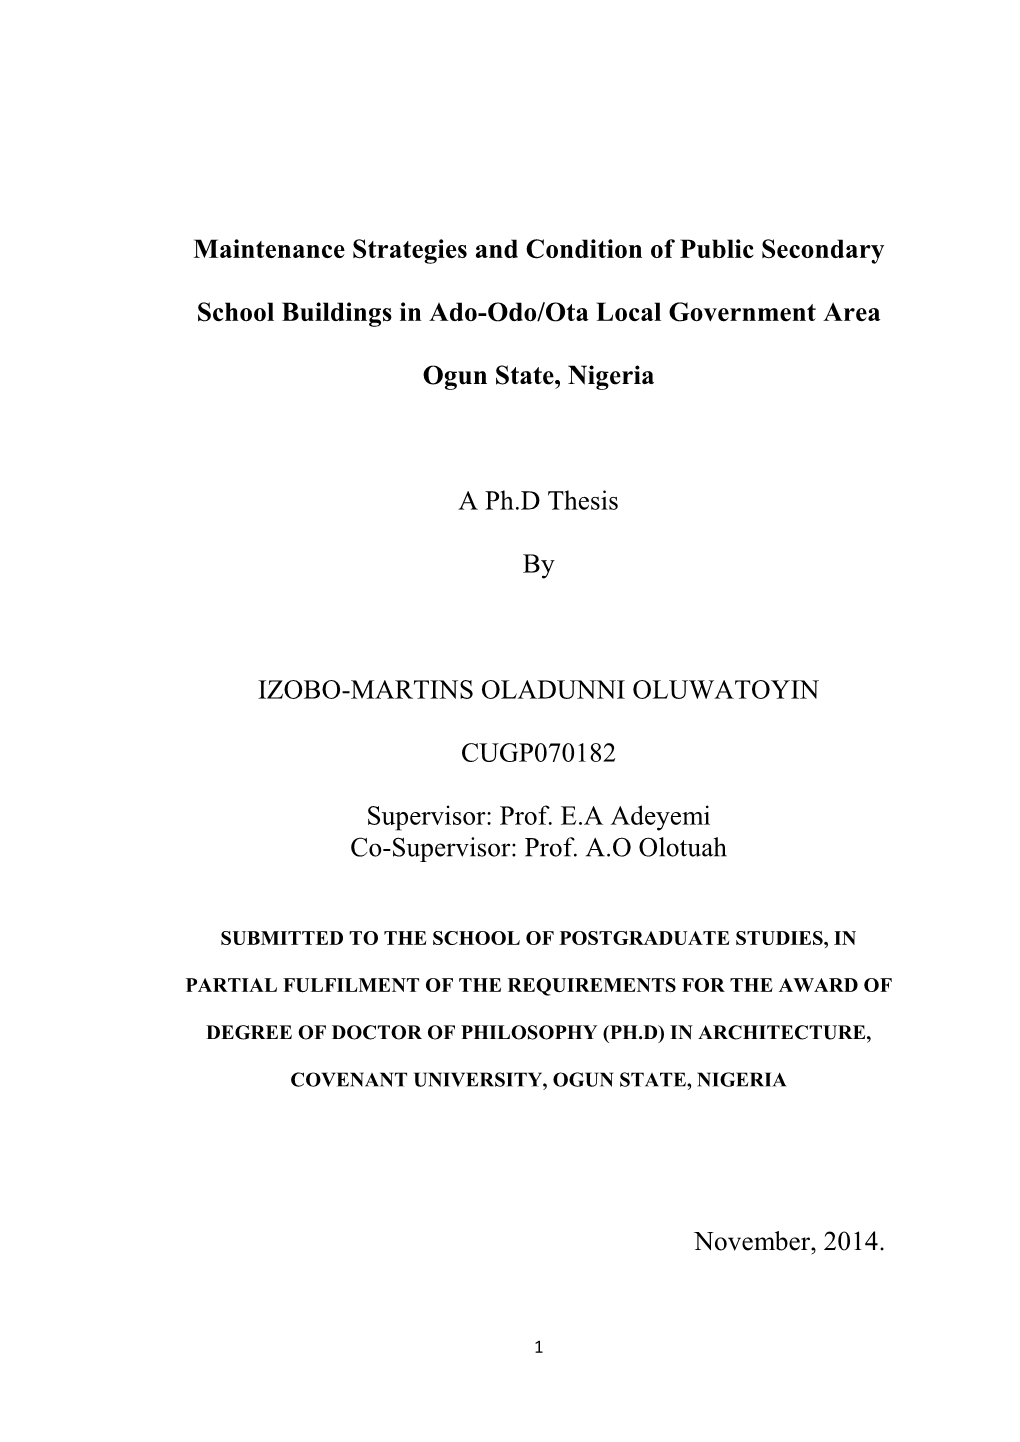 Maintenance Strategies and Condition of Public Secondary School Buildings in Nigeria